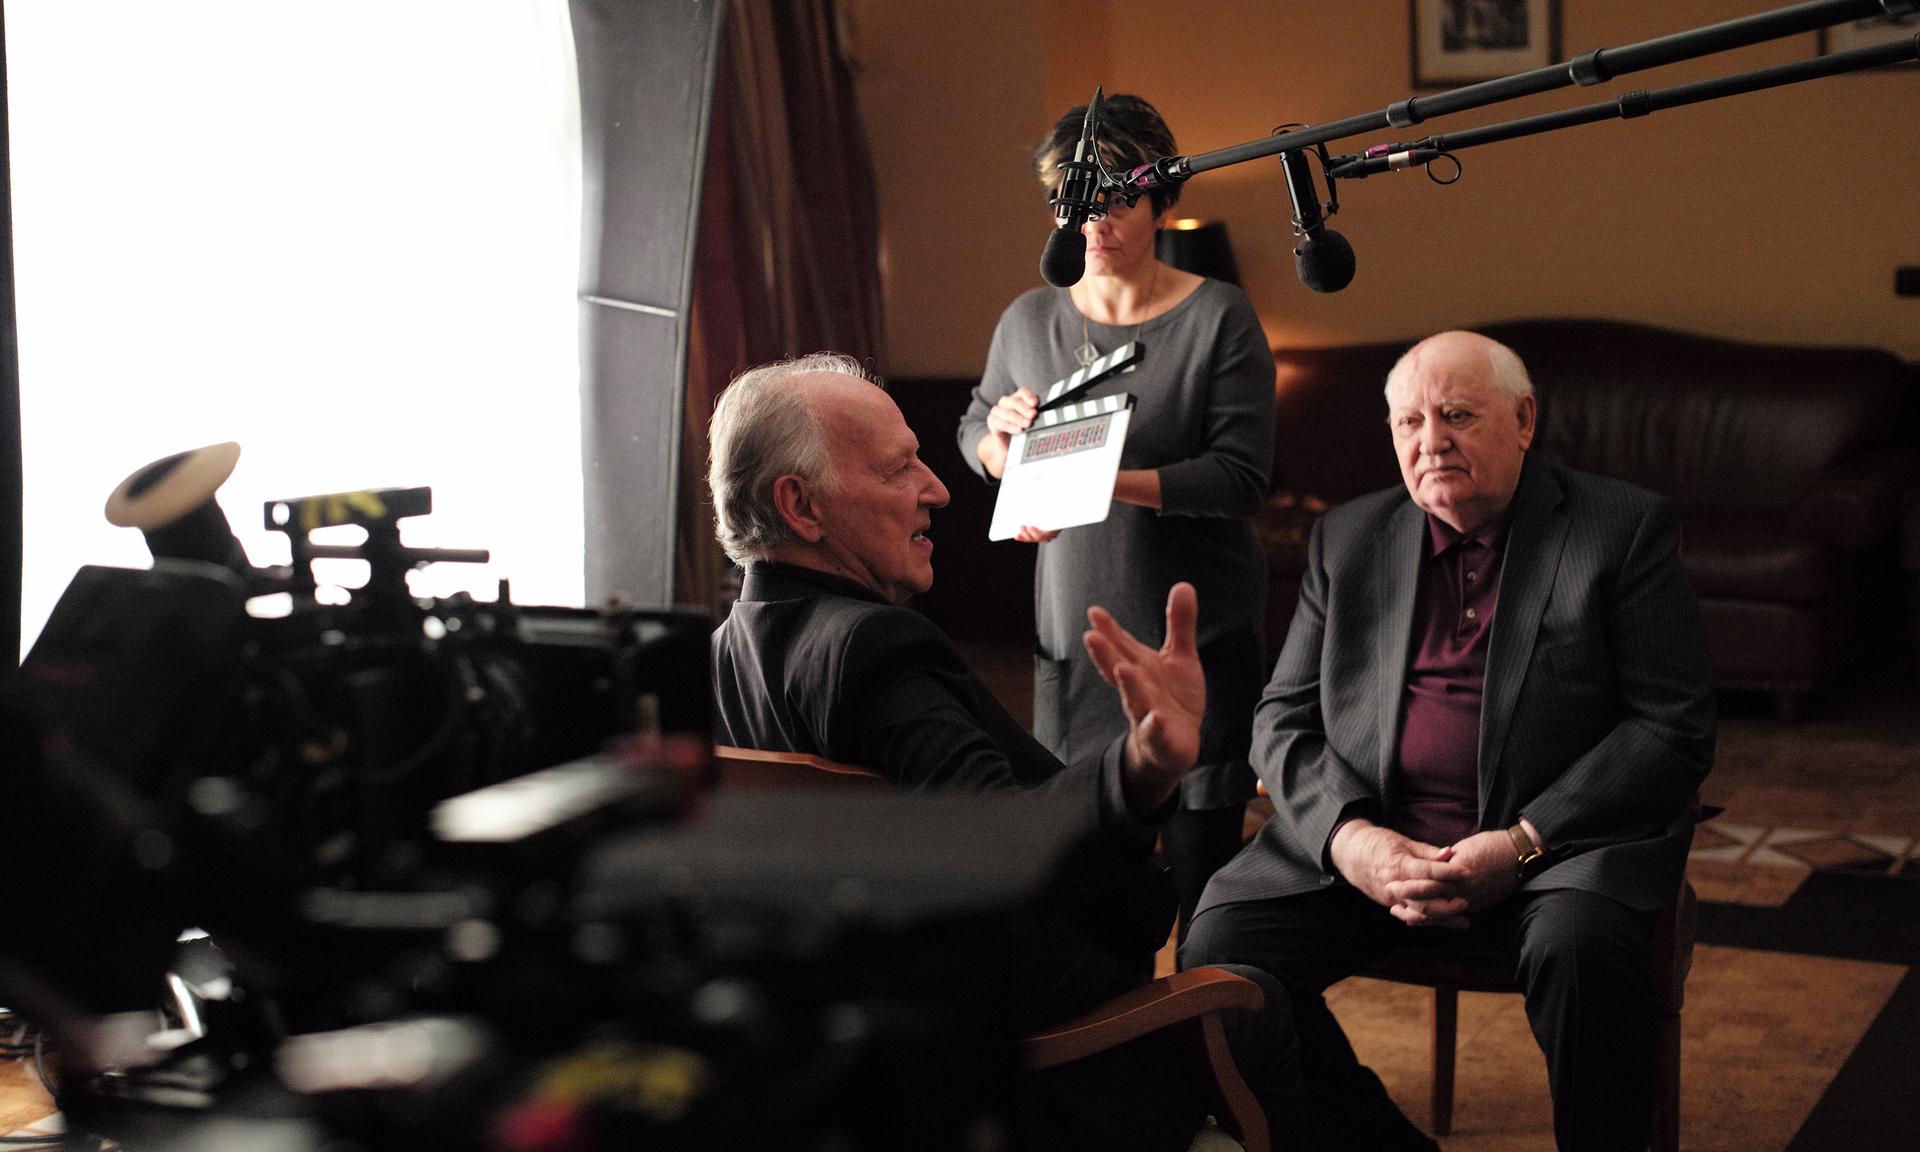 Director Werner Herzog and former leader of the Soviet Union Mikhail Gorbachev in the new documentary “Meeting Gorbachev.”